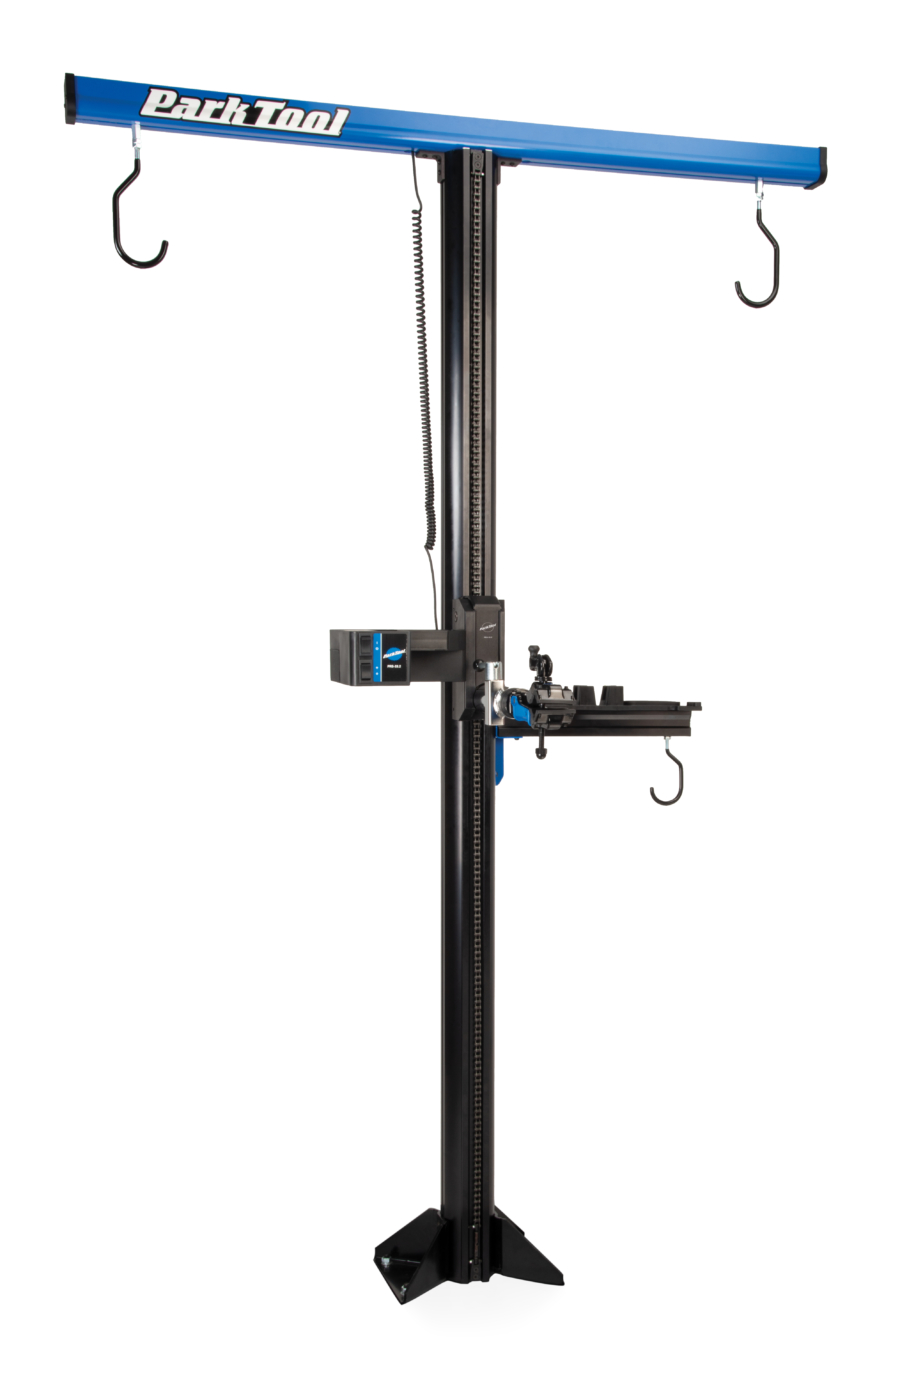 Park Tool PRS-33.2 Power Lift Shop Stand, enlarged